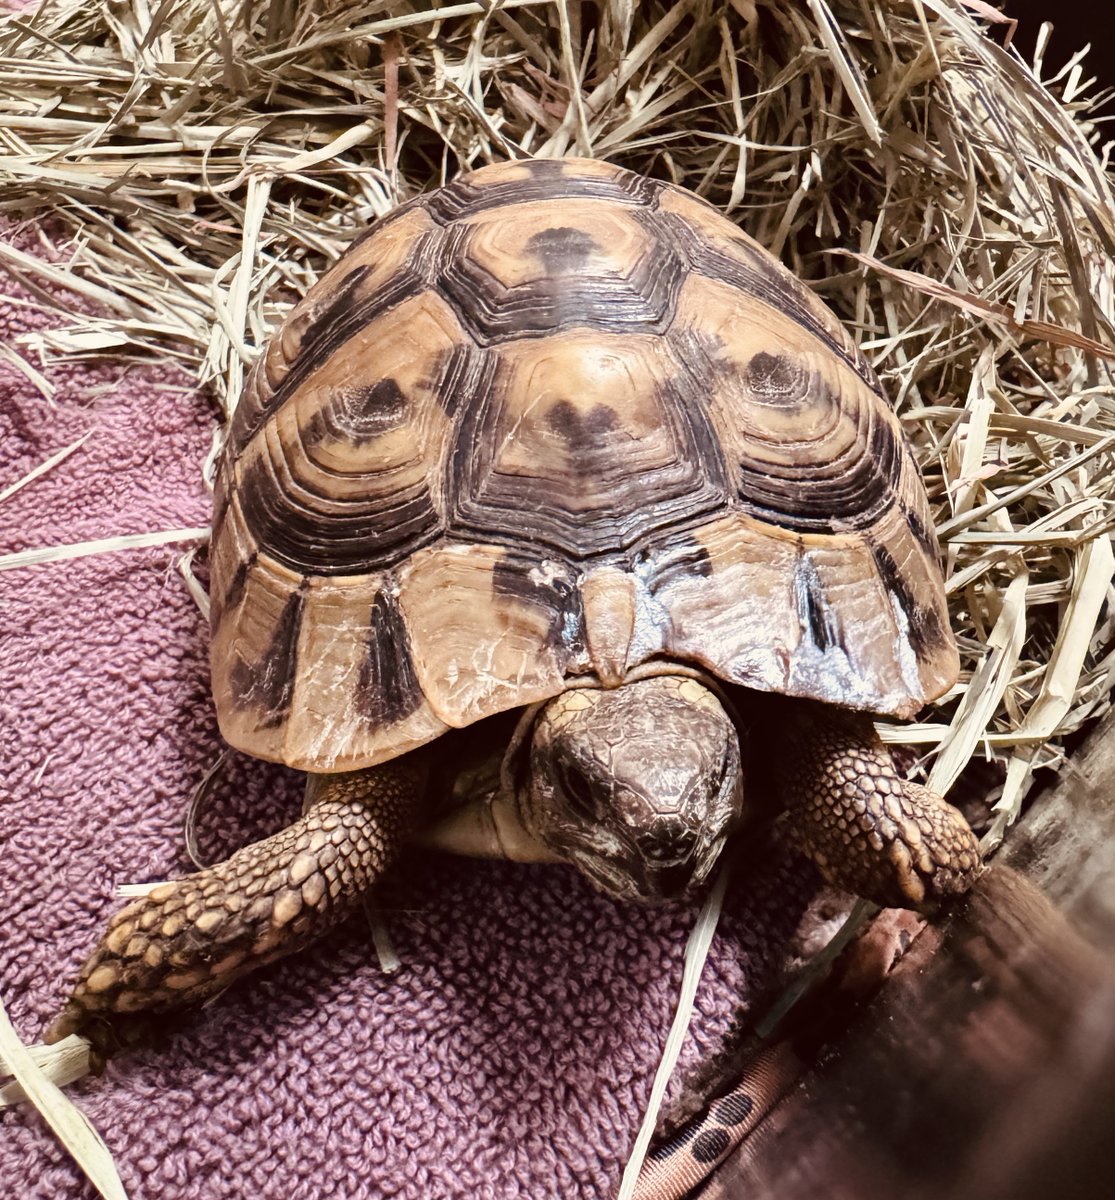 Today is #WorldTurtleDay - a day to celebrate turtles and tortoises - and we happen to have a tortoise patient here at AWLA! This female tortoise, Pistachio, was found outside with large cracks in her upper shell (carapace). We're happy to report that Pistachio is on the mend!